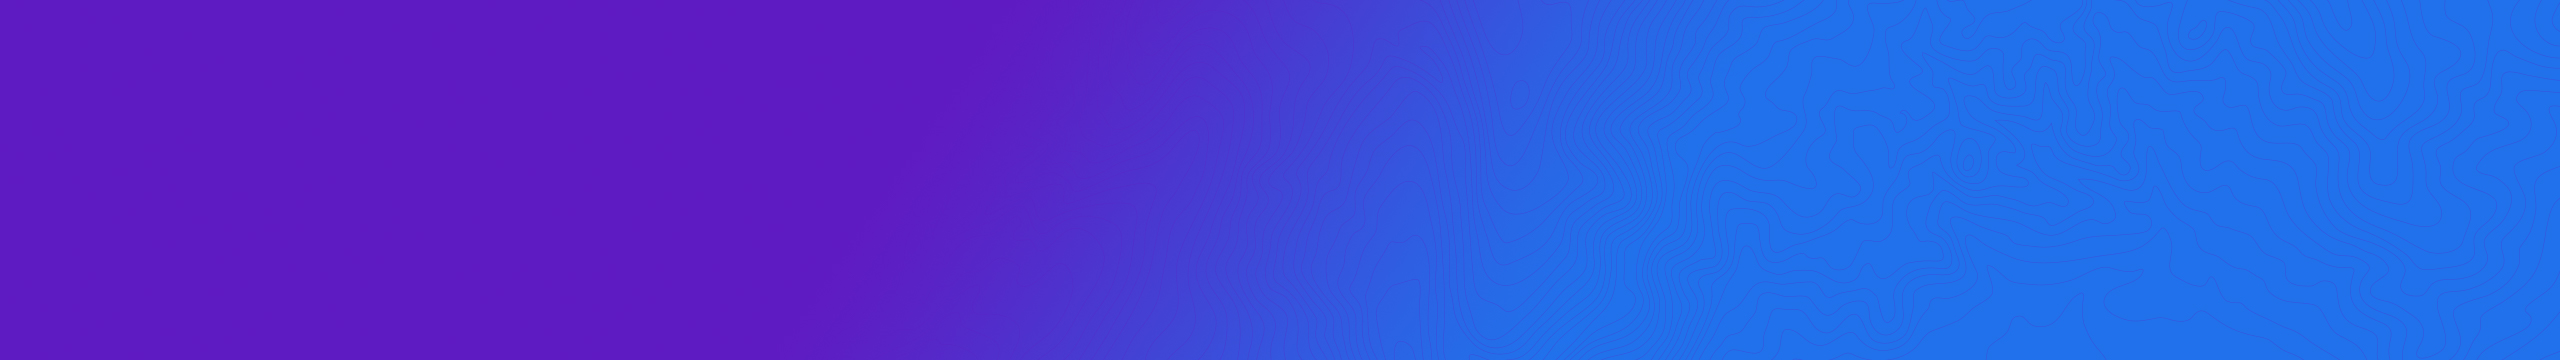 blueish-purple background with wavy lines on the right side